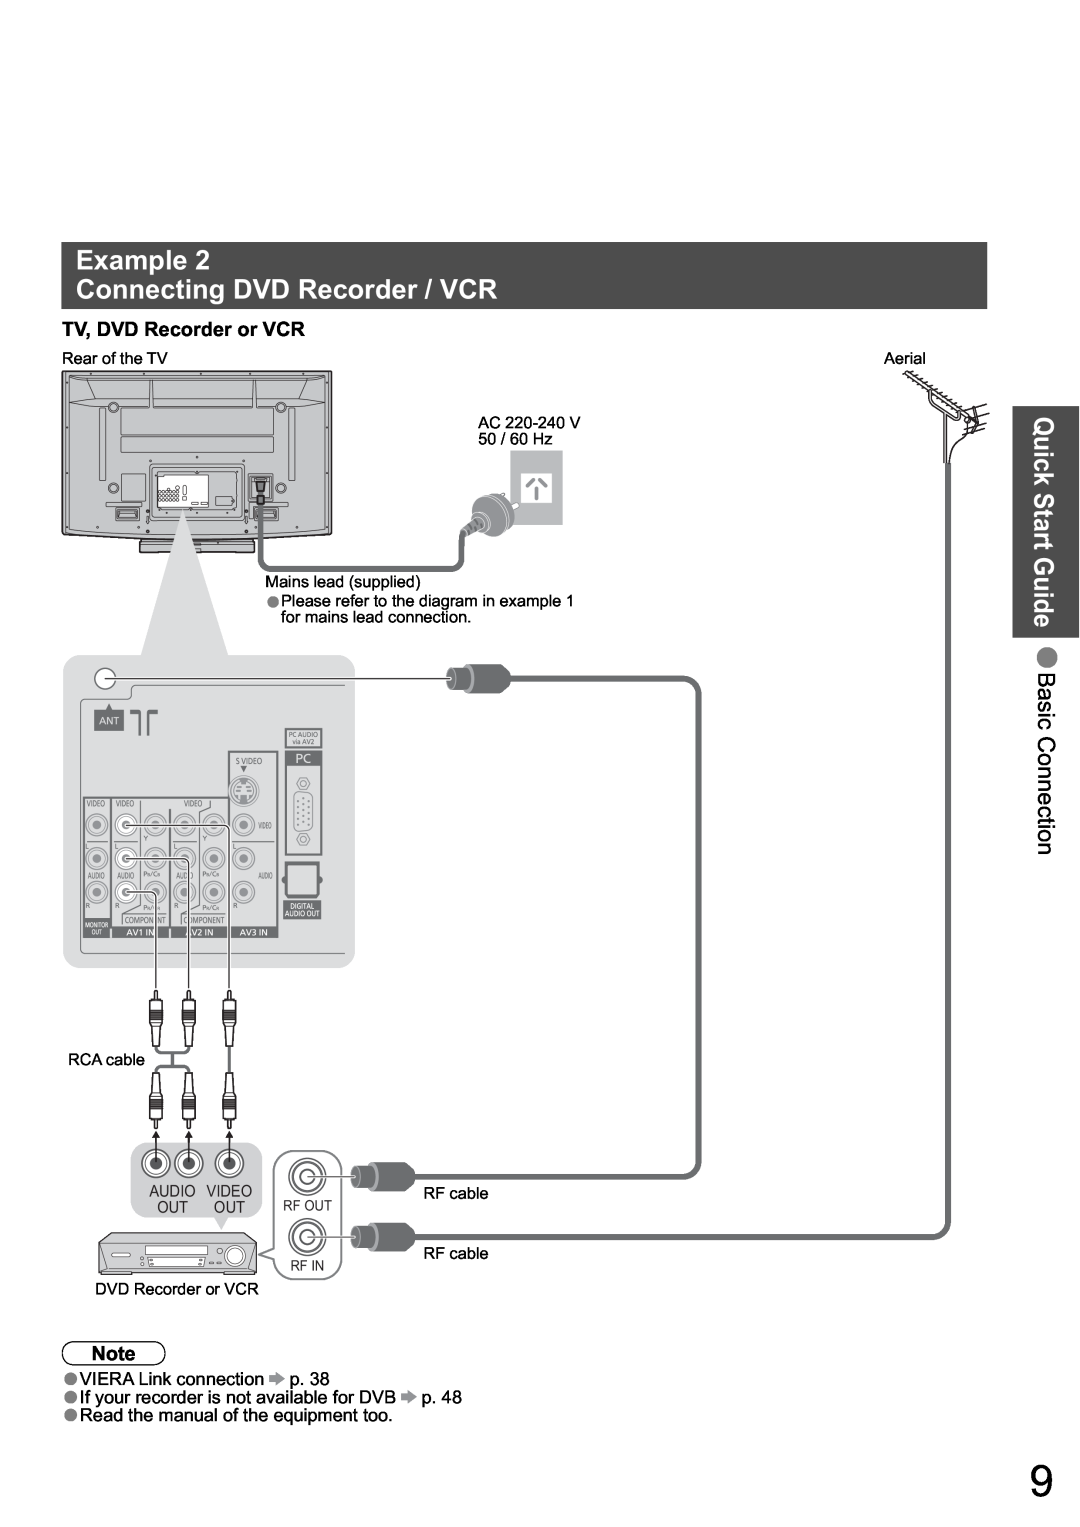 Panasonic TH-46PZ800A Example Connecting DVD Recorder / VCR, Quick Start Guide Basic Connection, TV, DVD Recorder or VCR 